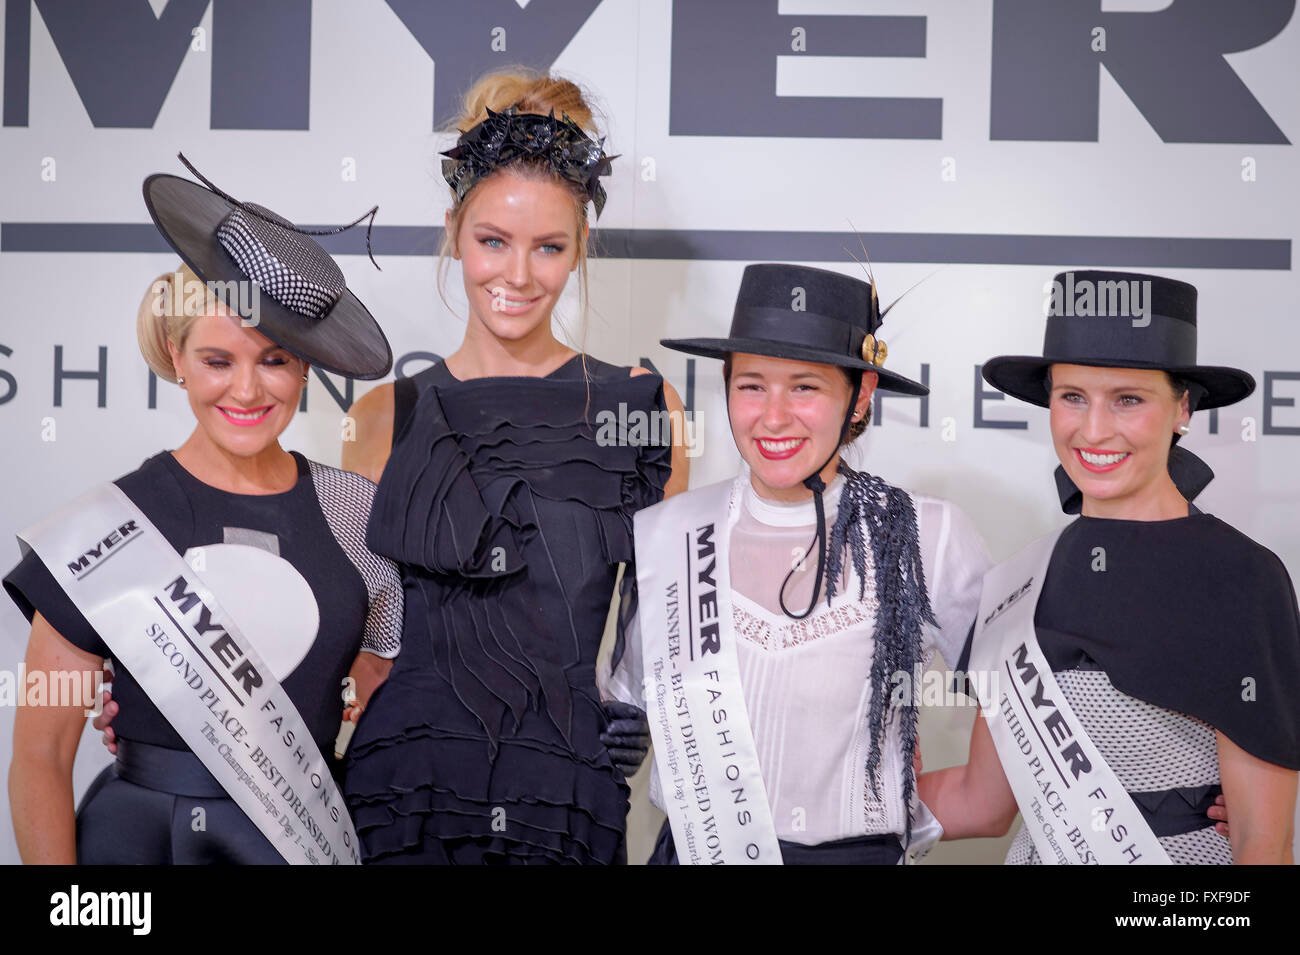 (L-R) Katie Flen, The Face of Myer Jennifer Hawkins, Viviana Parish and Chantelle Buckley following the Best Dressed Women’s Racewear (black & white) competition for the Myer Fashions on the Field competition at Royal Randwick. Racegoers dress in monochromatic ensembles to impress and compete for the track’s best dressed men and women vied and a piece of the $60,000 prize pool. Sydney, Australia. 02 April, 2016. © Hugh Peterswald/Alamy Live News Stock Photo